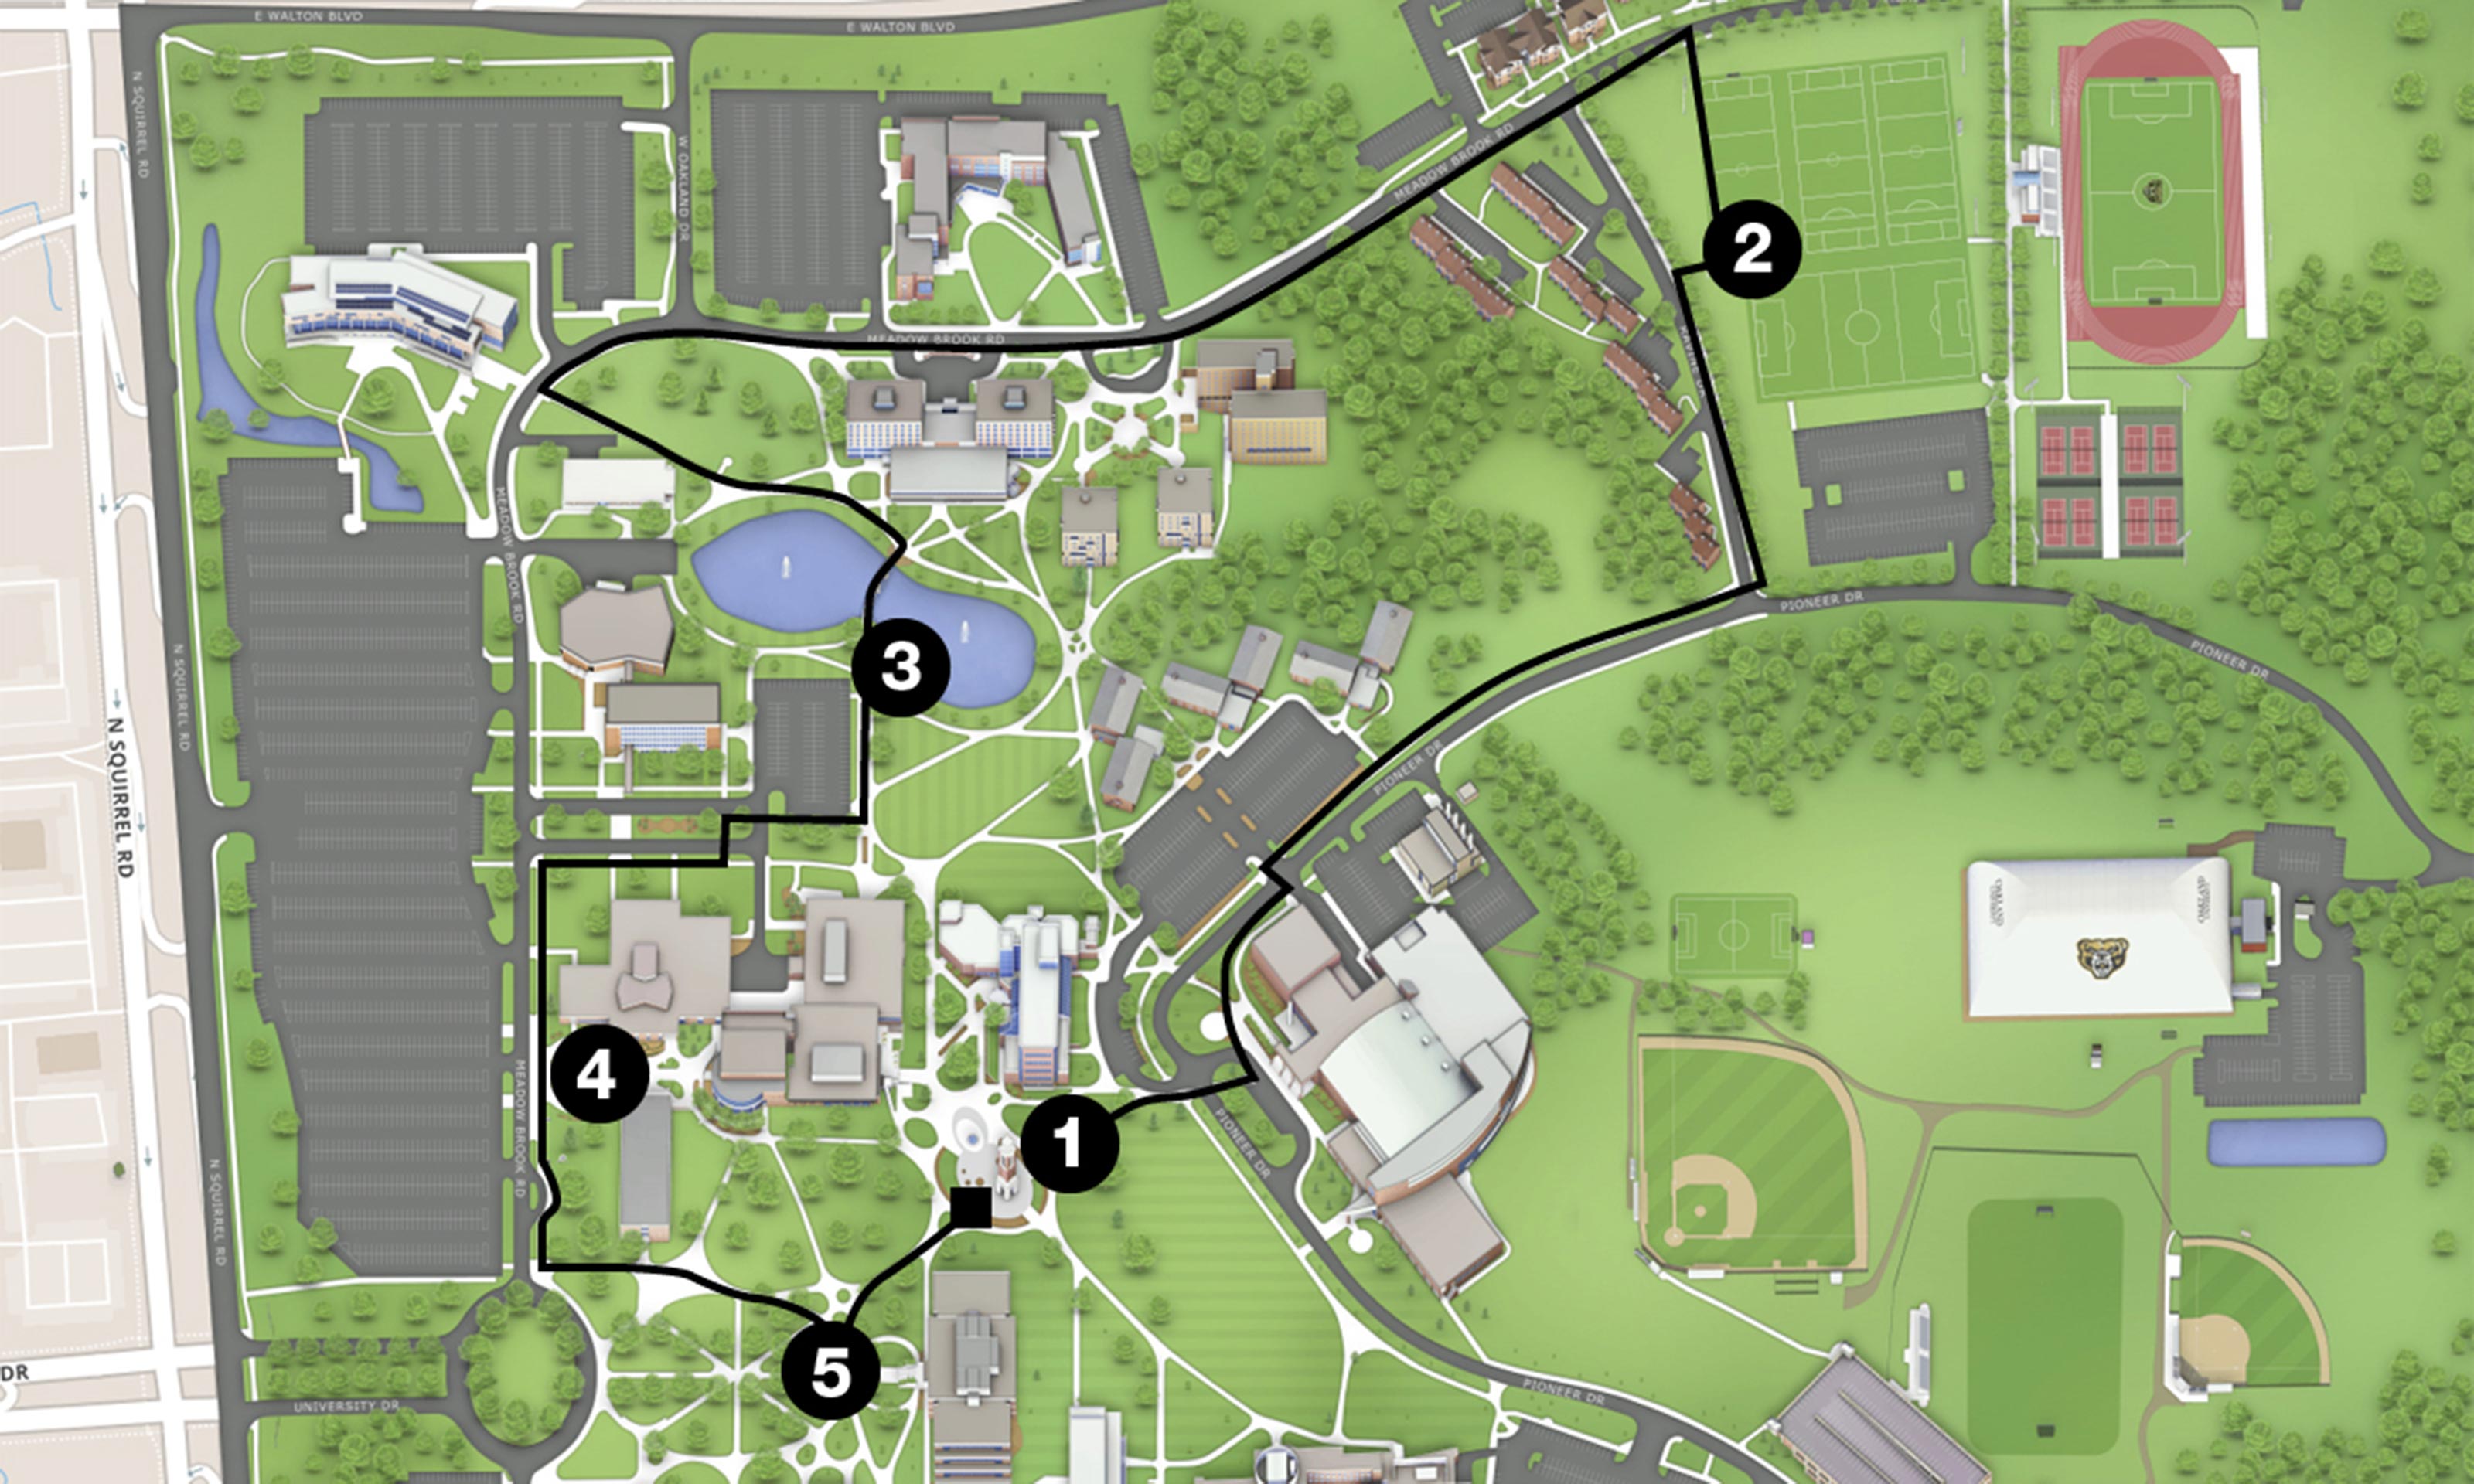 5K course route at Oakland University in Rochester Hills